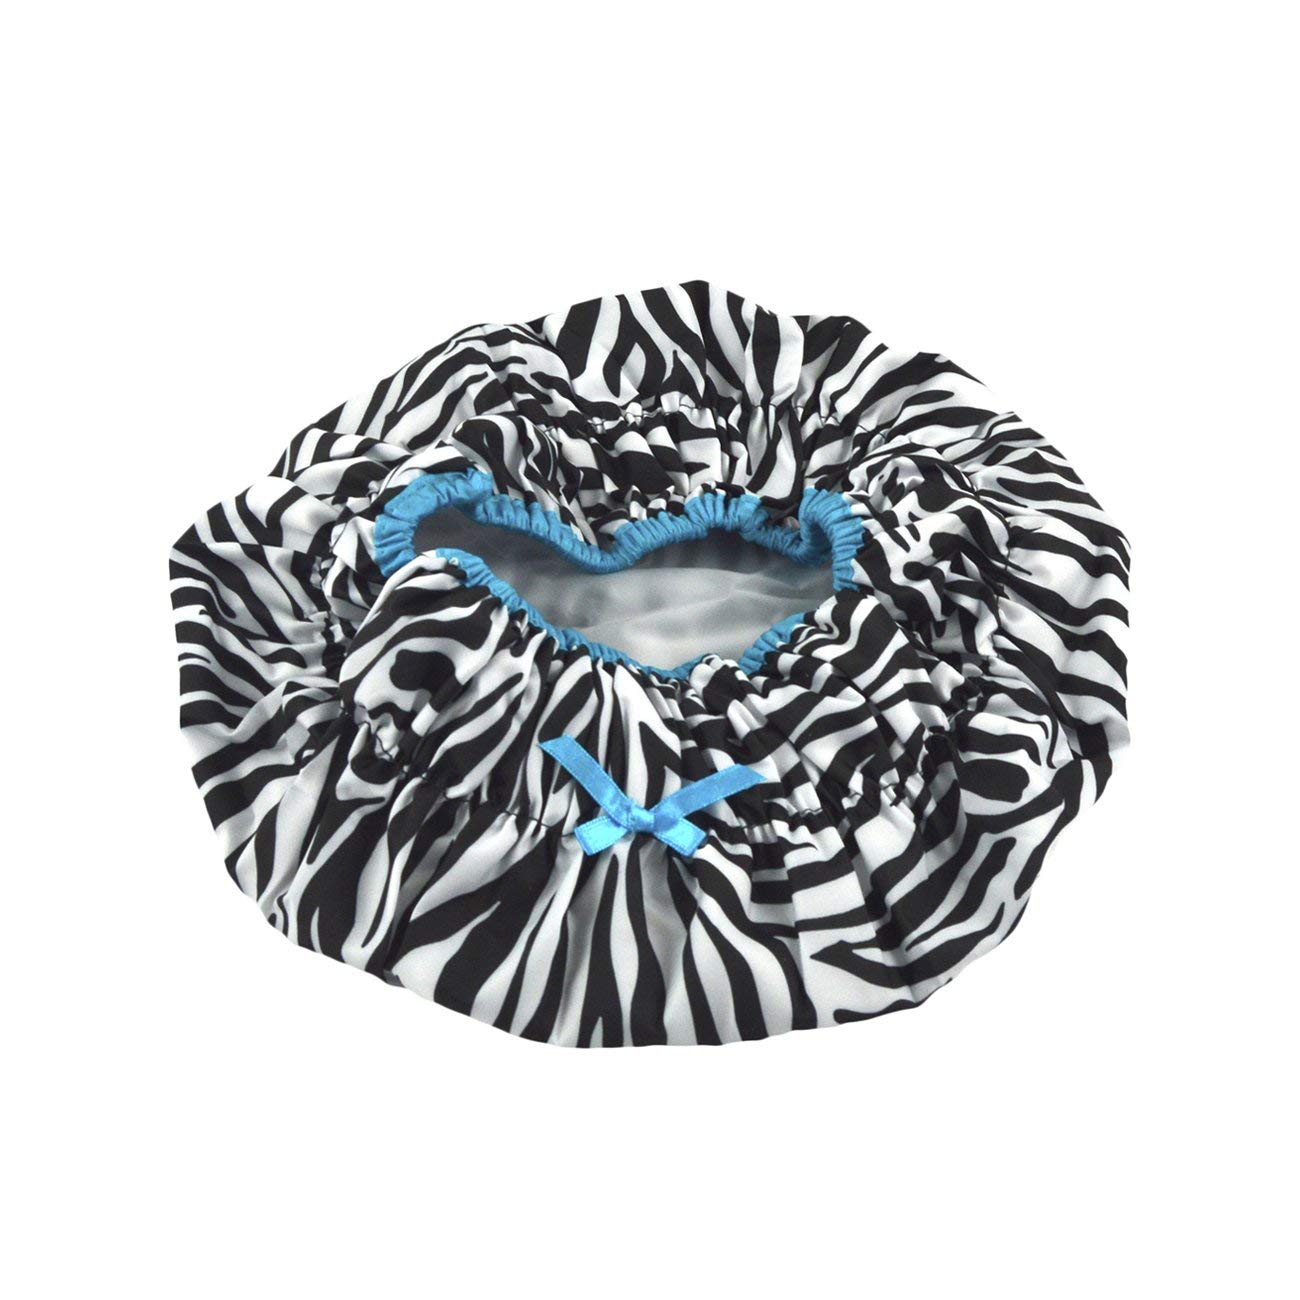 Reusable Shower Cap & Bath Cap & Lined, Oversized Waterproof Shower Caps Large Designed for all Hair Lengths with PEVA Lining & Elastic Band Stretch Hem Hair Hat - Fashionista Sassy Stripes